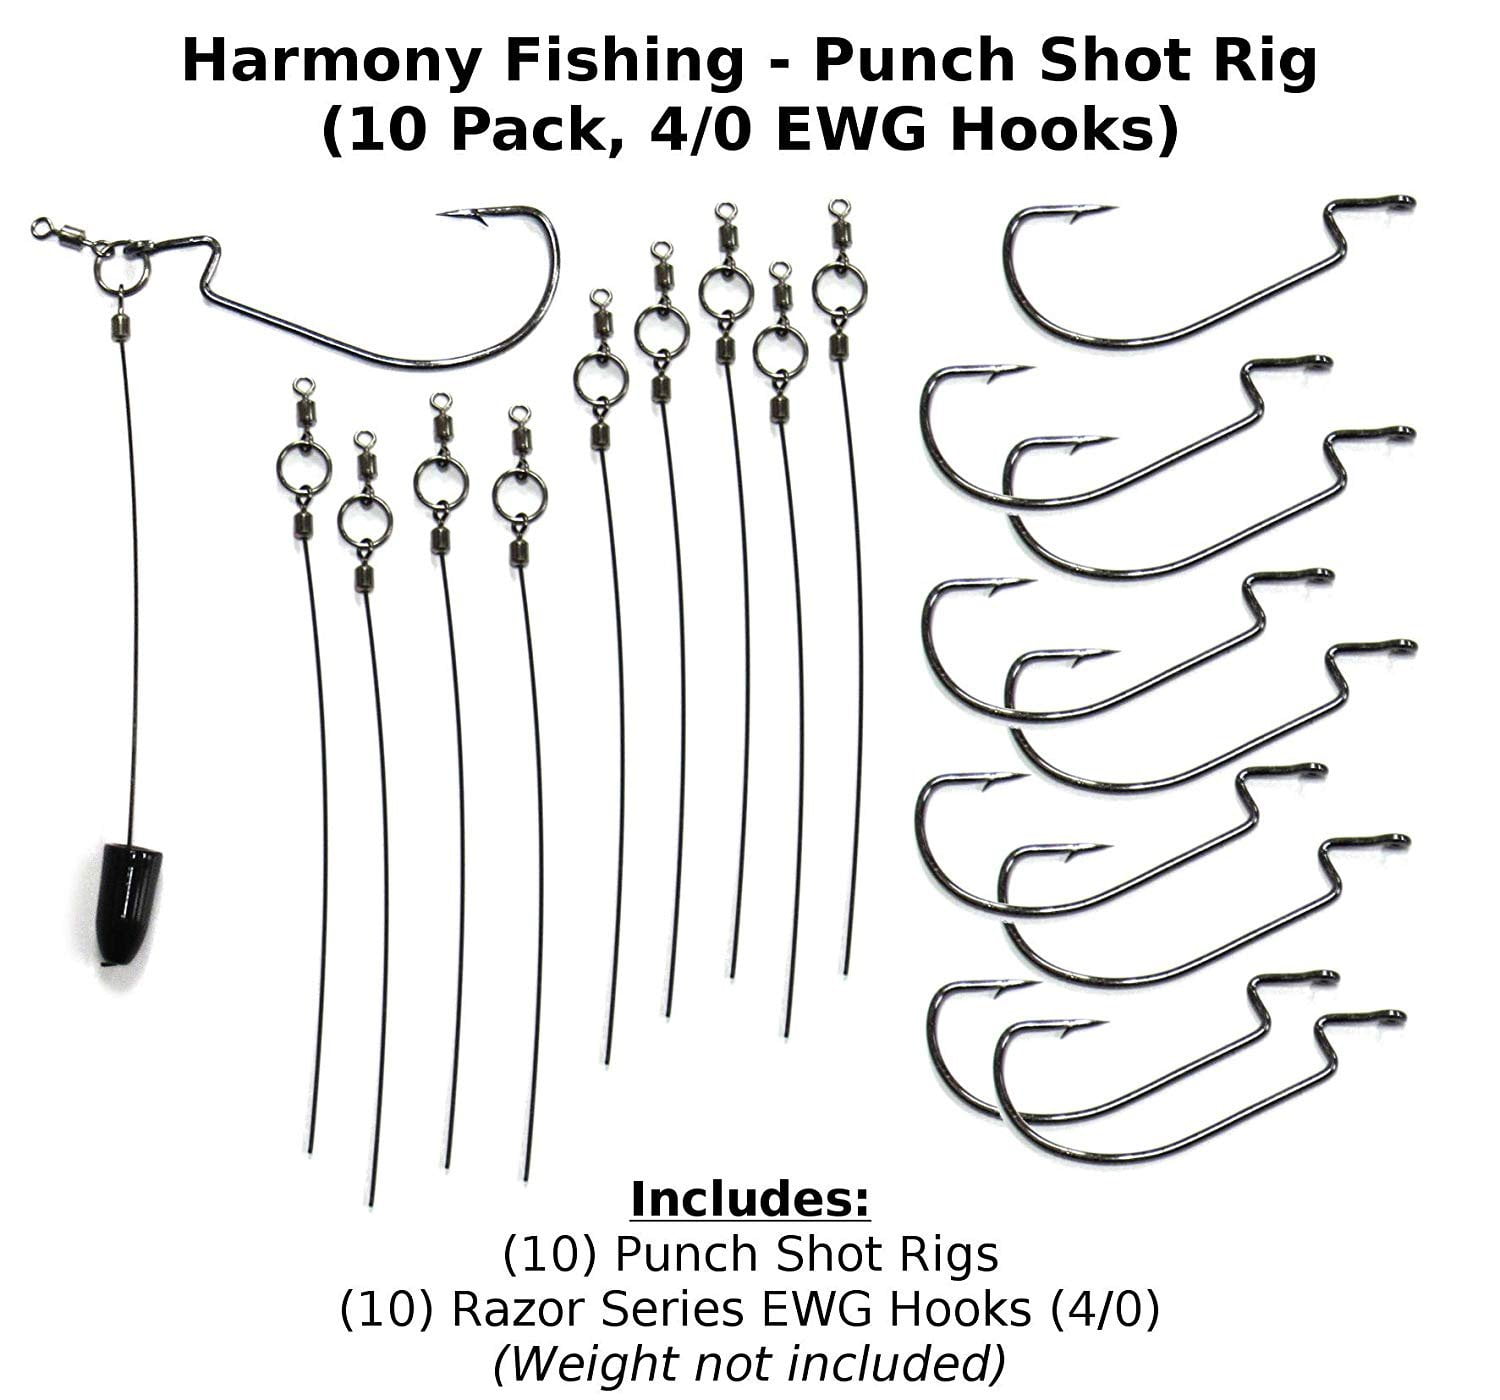 Harmony Fishing Company Punch Shot Rig Kit 4/0 EWG Hooks Interchangeable  Hook Leadered Punch Shot Rig 10 Pack